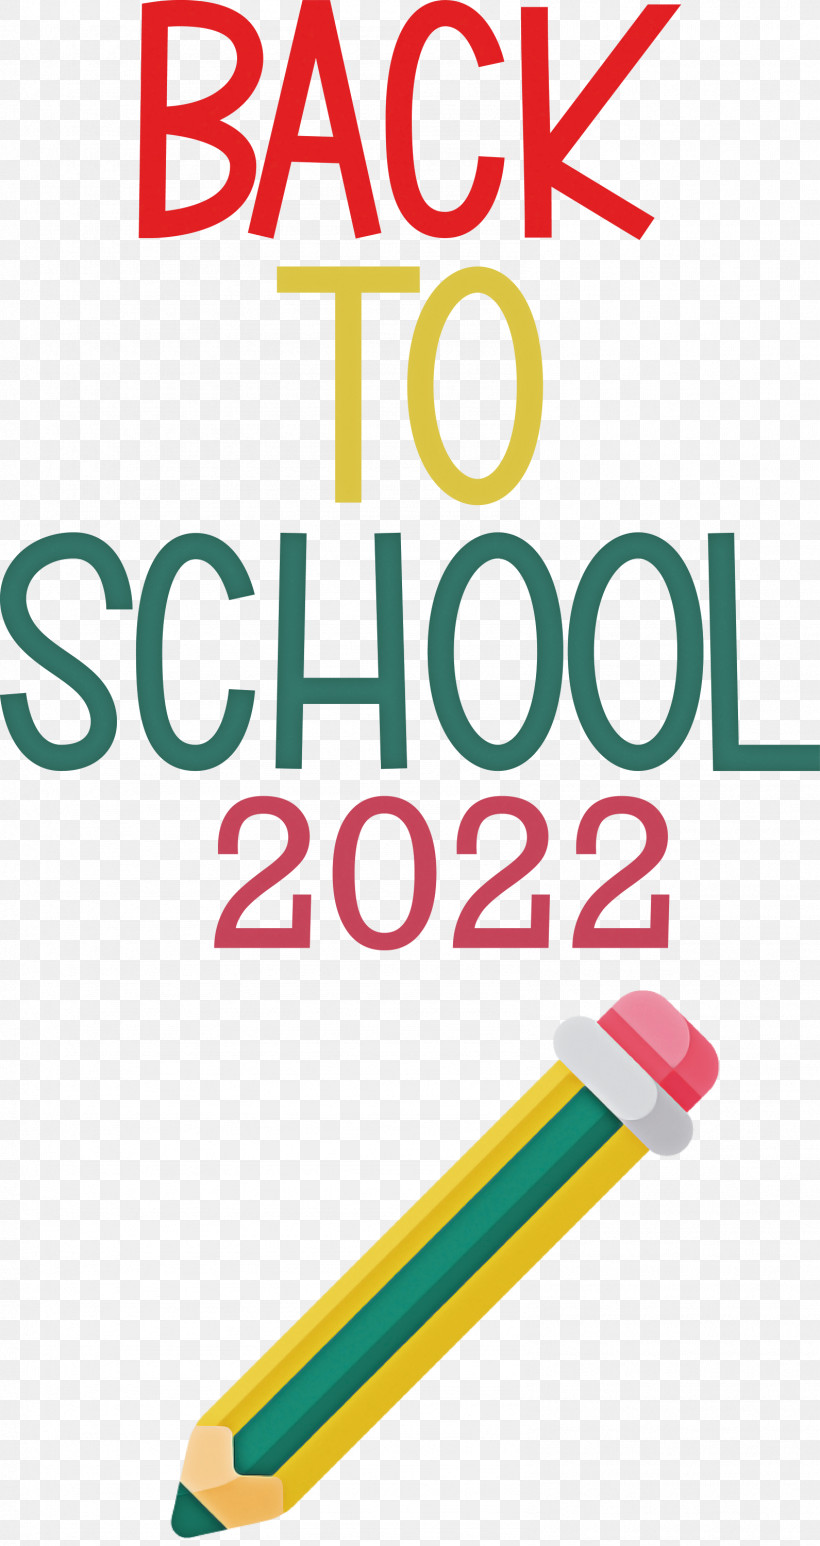 Back To School 2022 Education, PNG, 1591x3000px, Education, Geometry, Line, Material, Mathematics Download Free